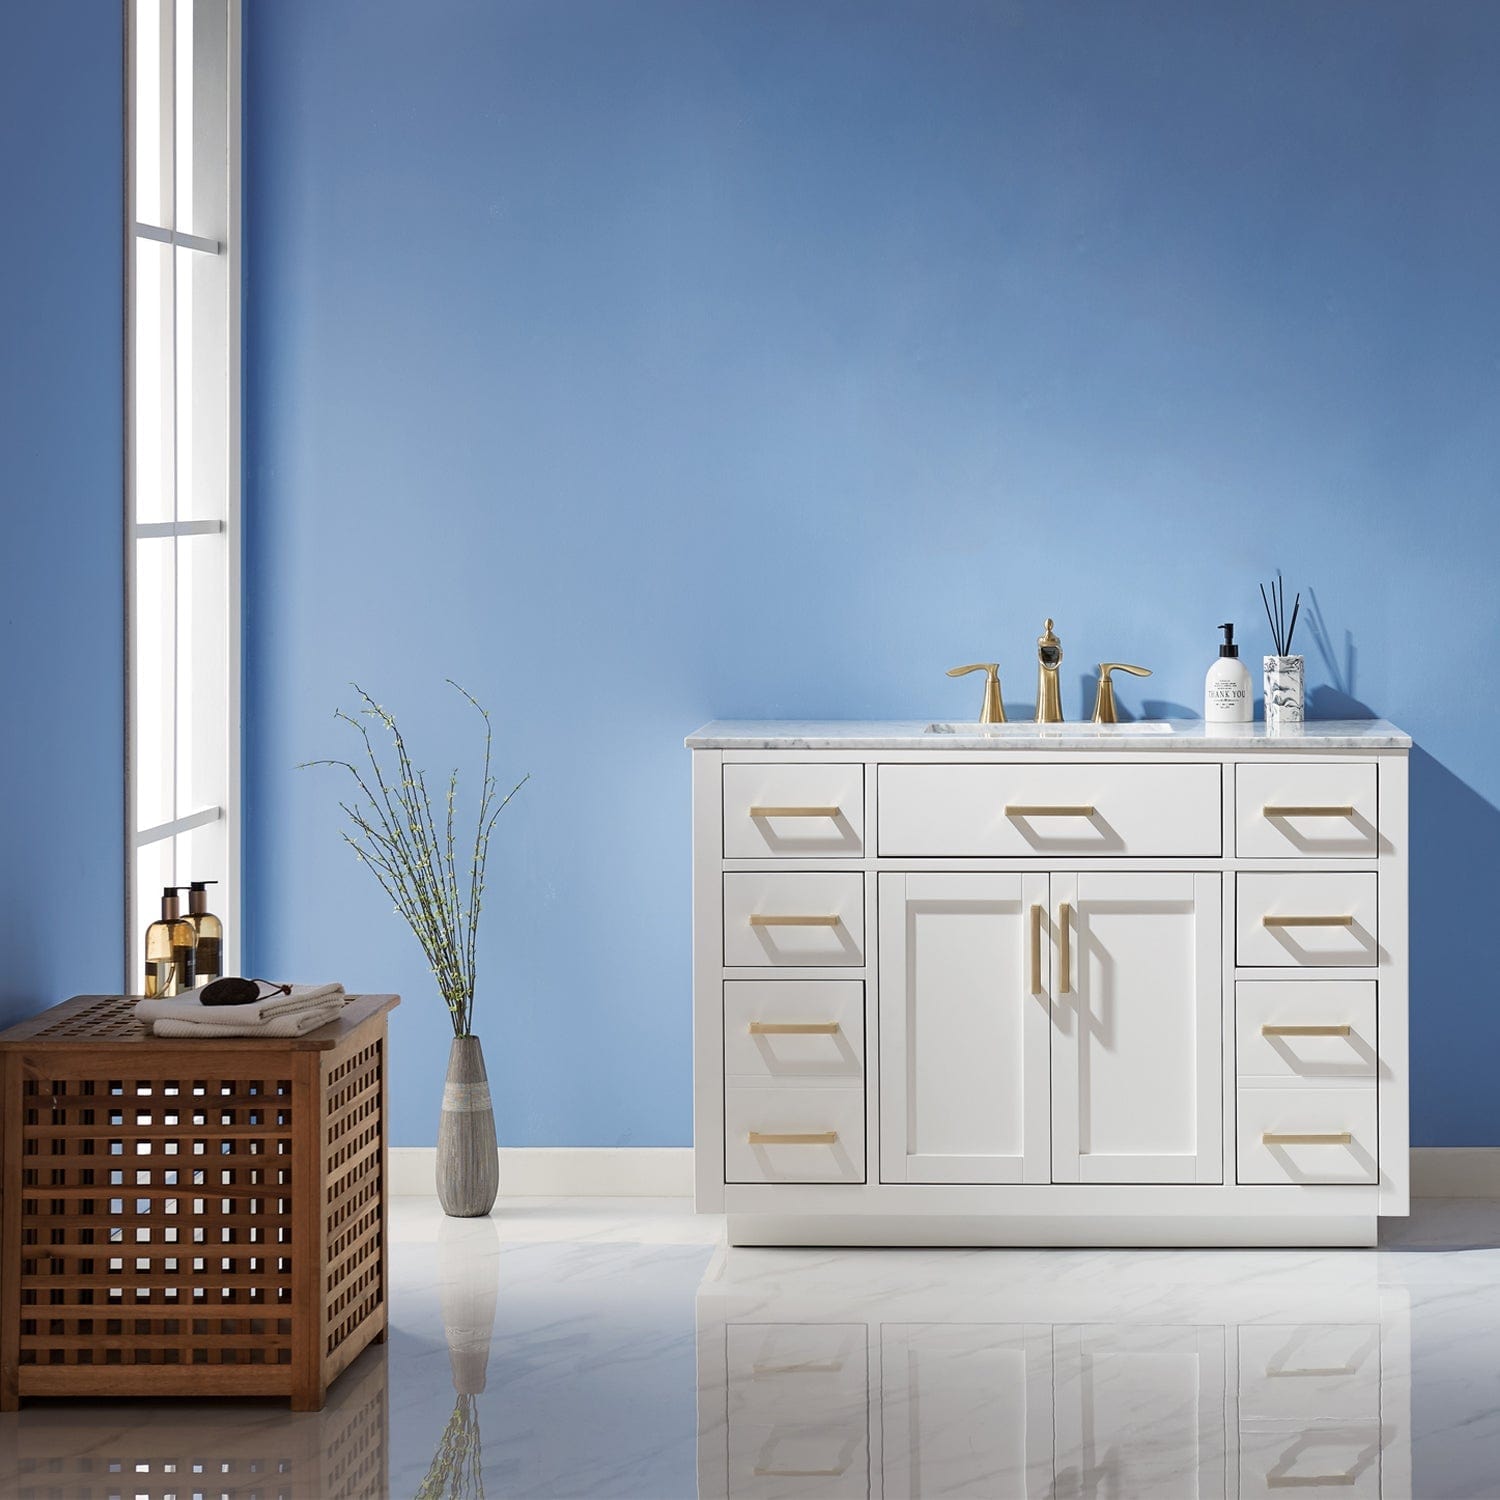 Altair Ivy 48" Single Bathroom Vanity Set in White and Carrara White Marble Countertop without Mirror 531048-WH-CA-NM - Molaix631112971201Vanity531048-WH-CA-NM